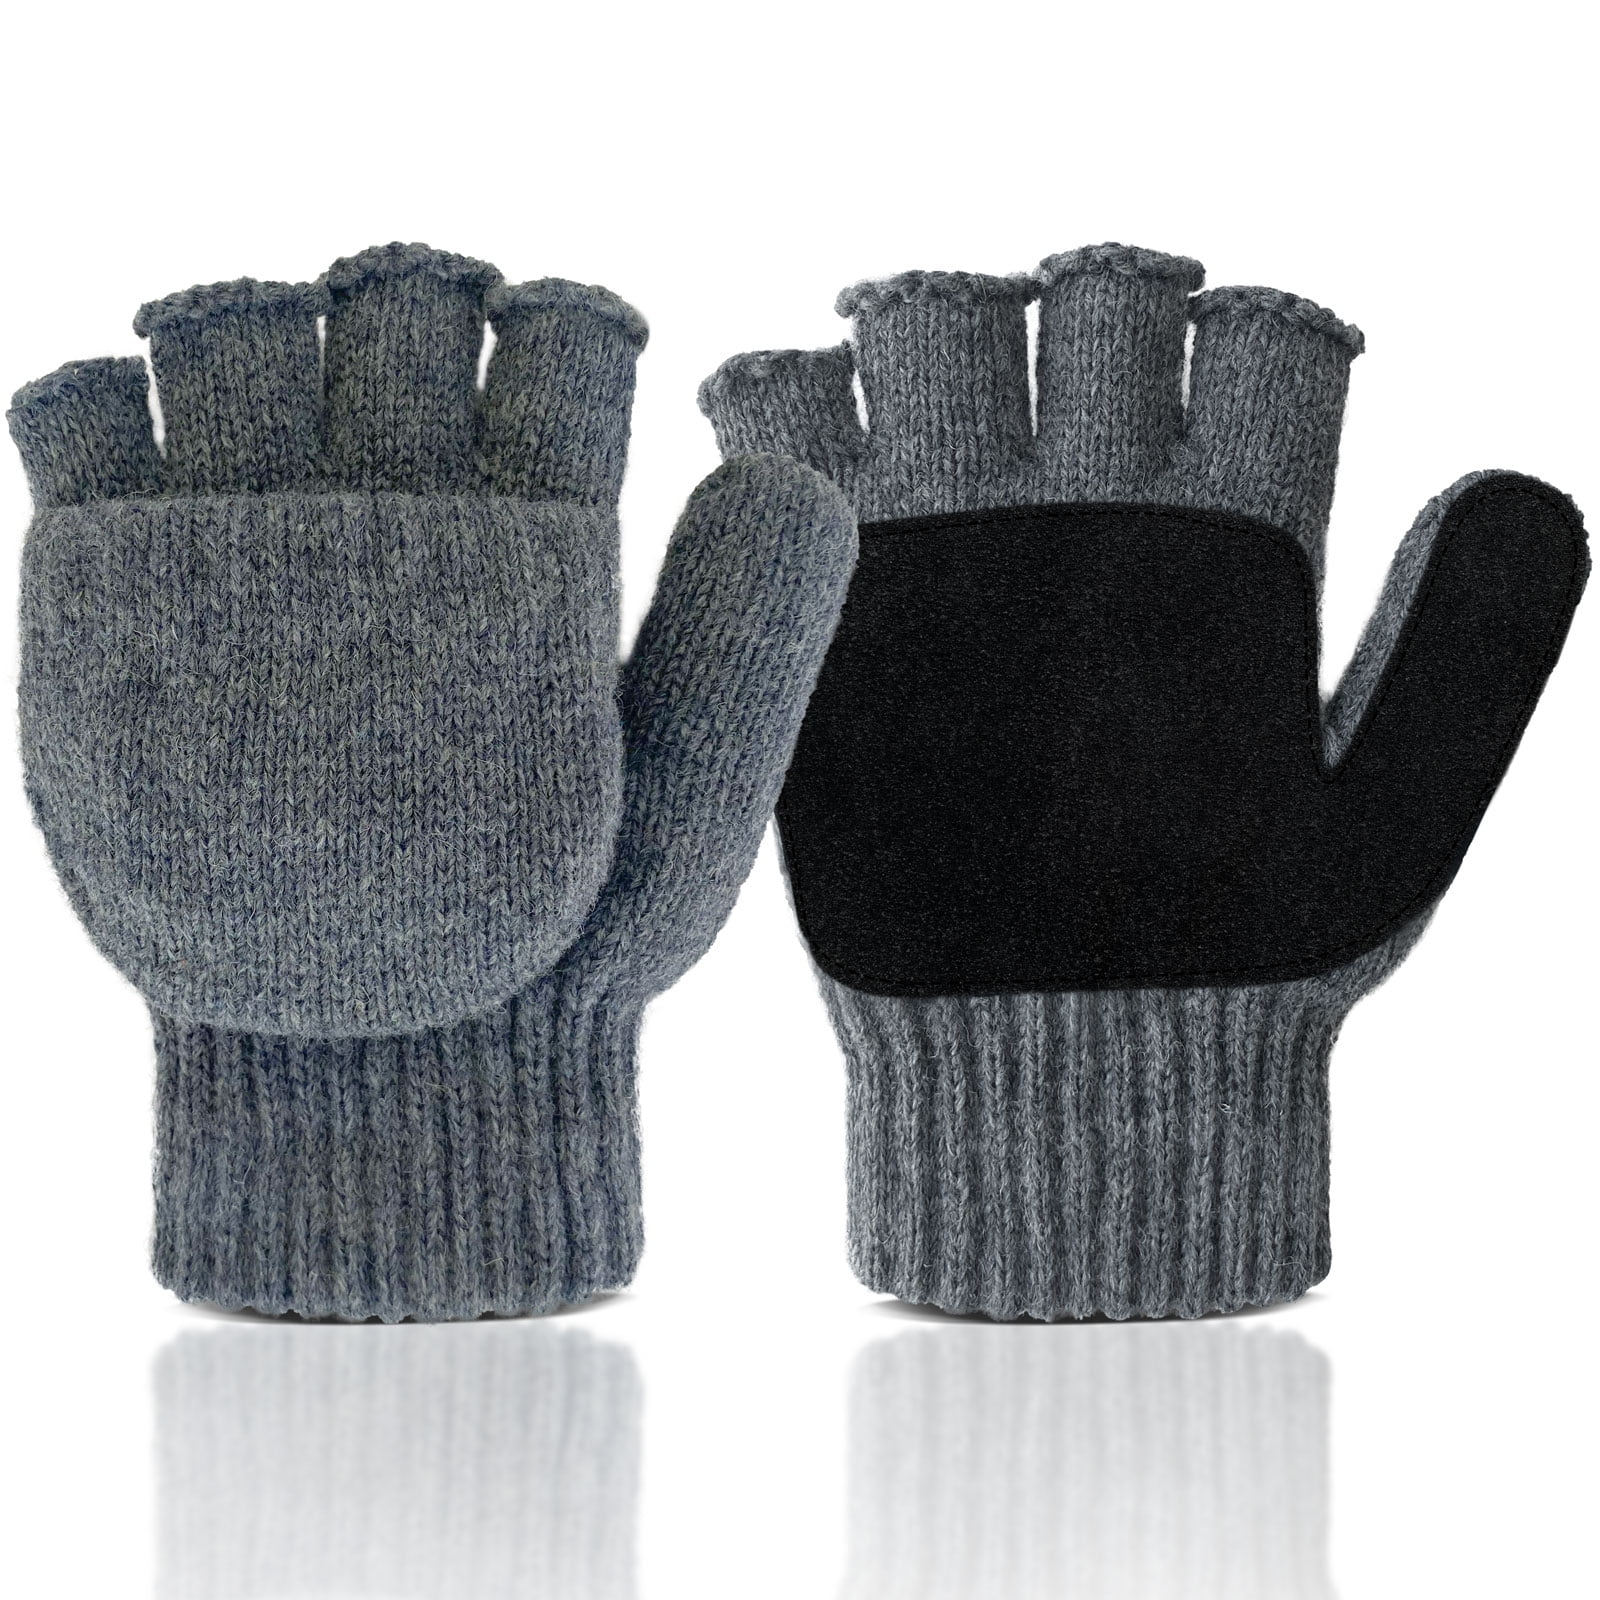 EvridWear Winter Convertible Fingerless Gloves, Wool Mittens Warm, with  Anti-Slip Suede Leather Palm and Thumb, Unisex Style